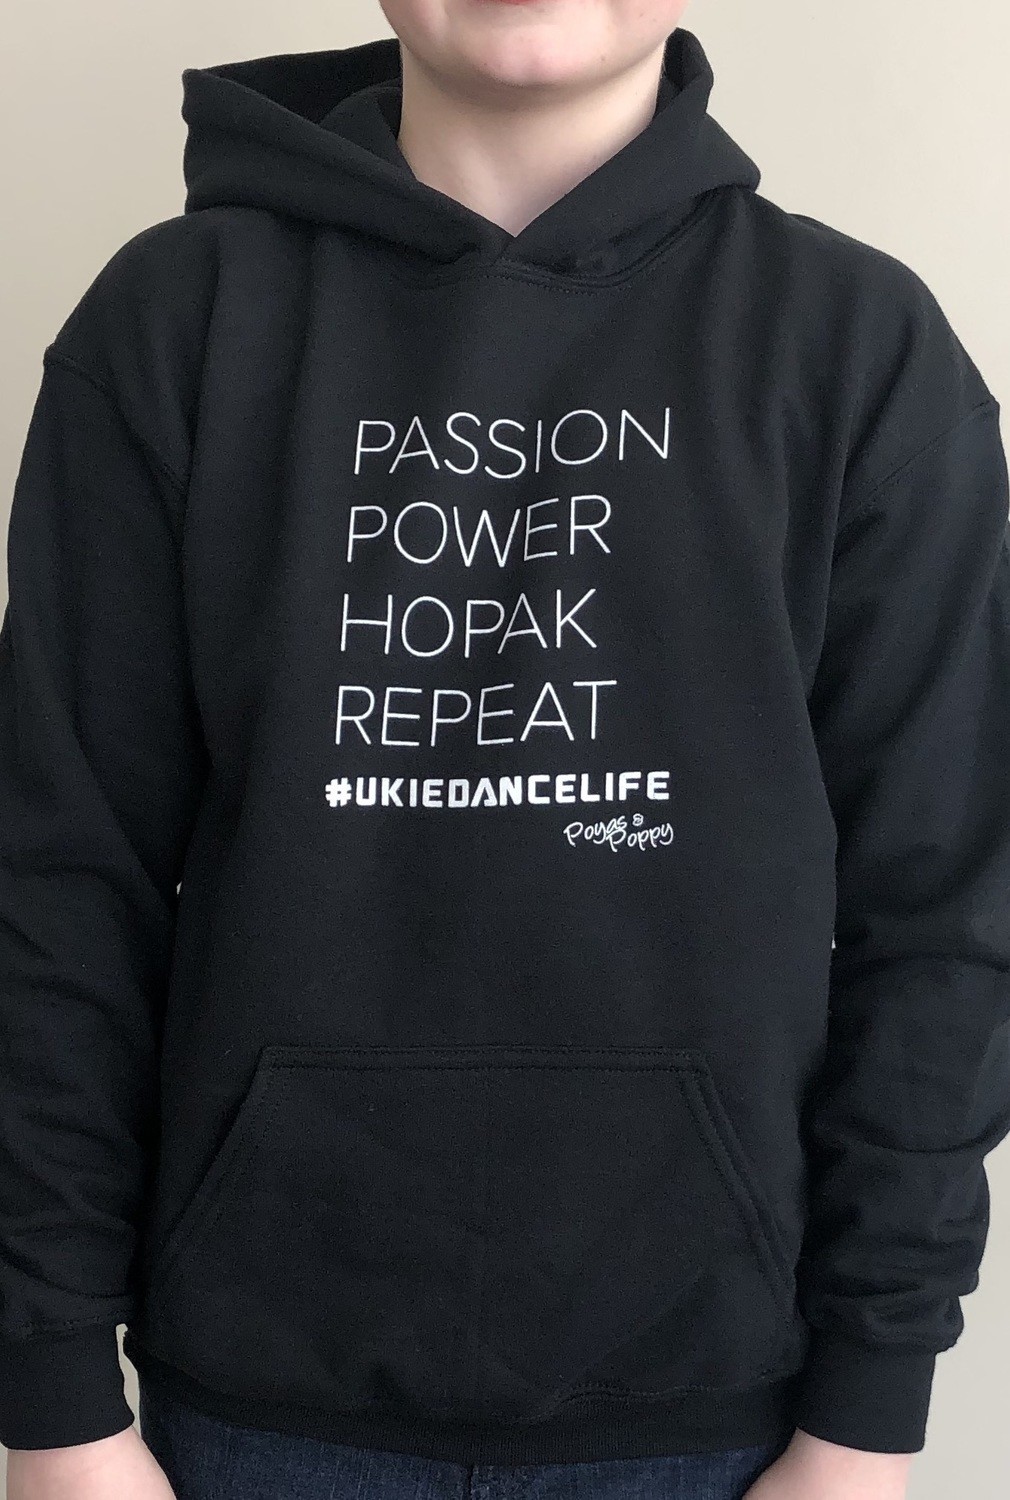 Passion Power Hopak Repeat Youth Hoodie